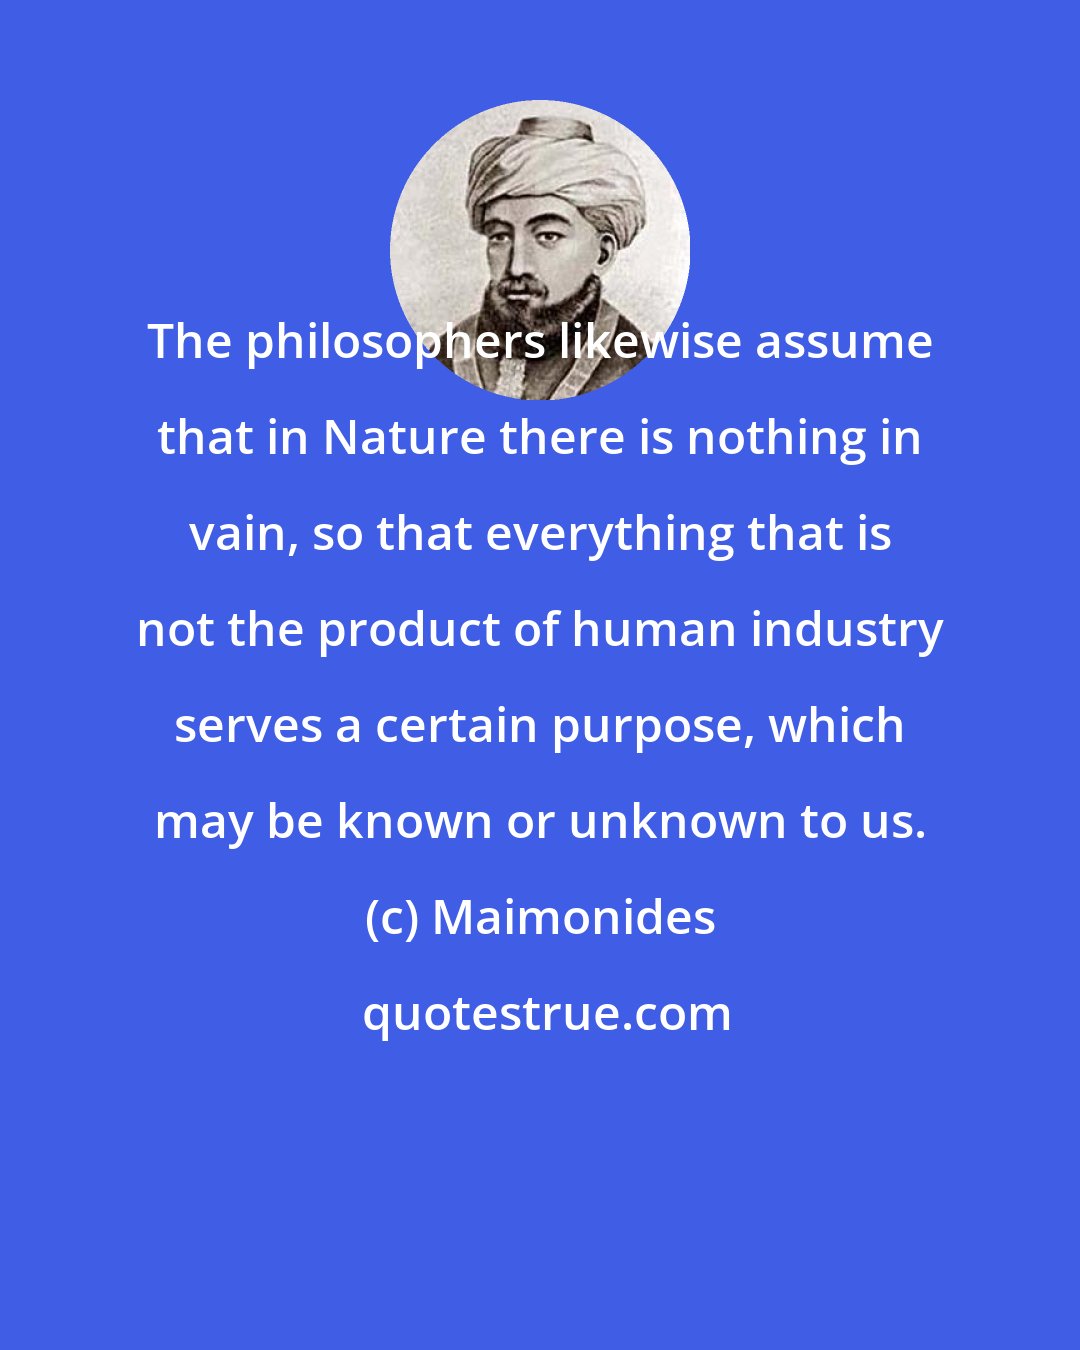 Maimonides: The philosophers likewise assume that in Nature there is nothing in vain, so that everything that is not the product of human industry serves a certain purpose, which may be known or unknown to us.